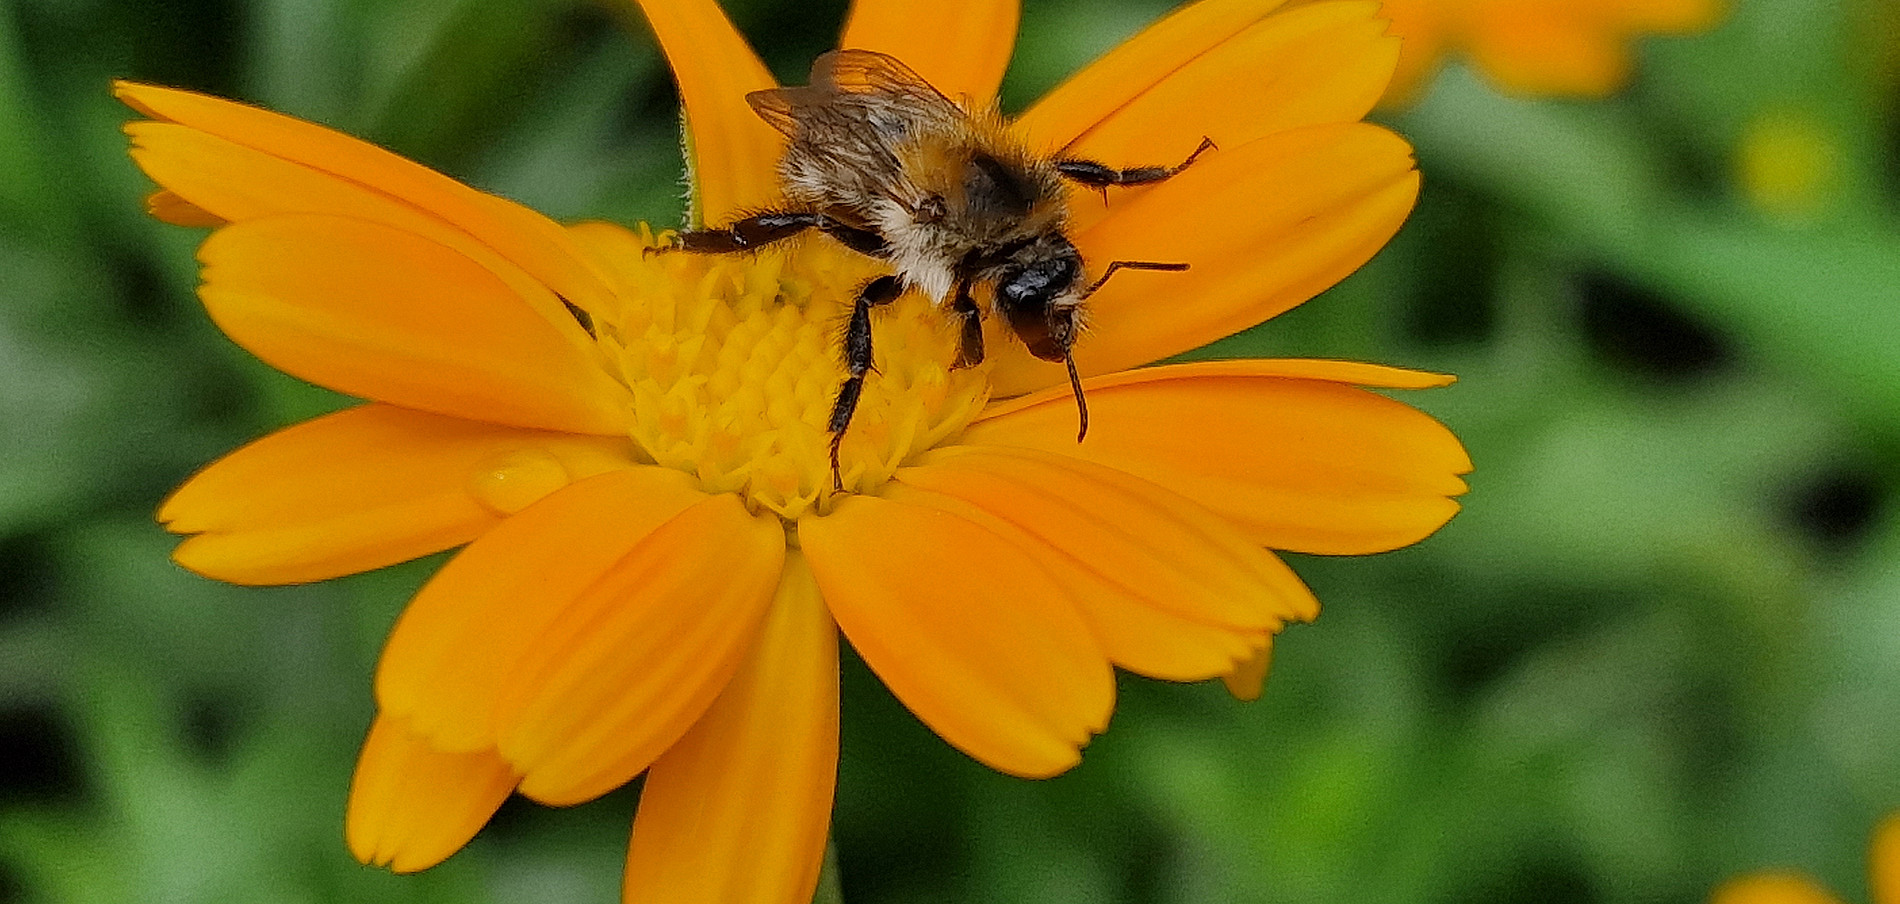 A bee sitting on a marigold flower 